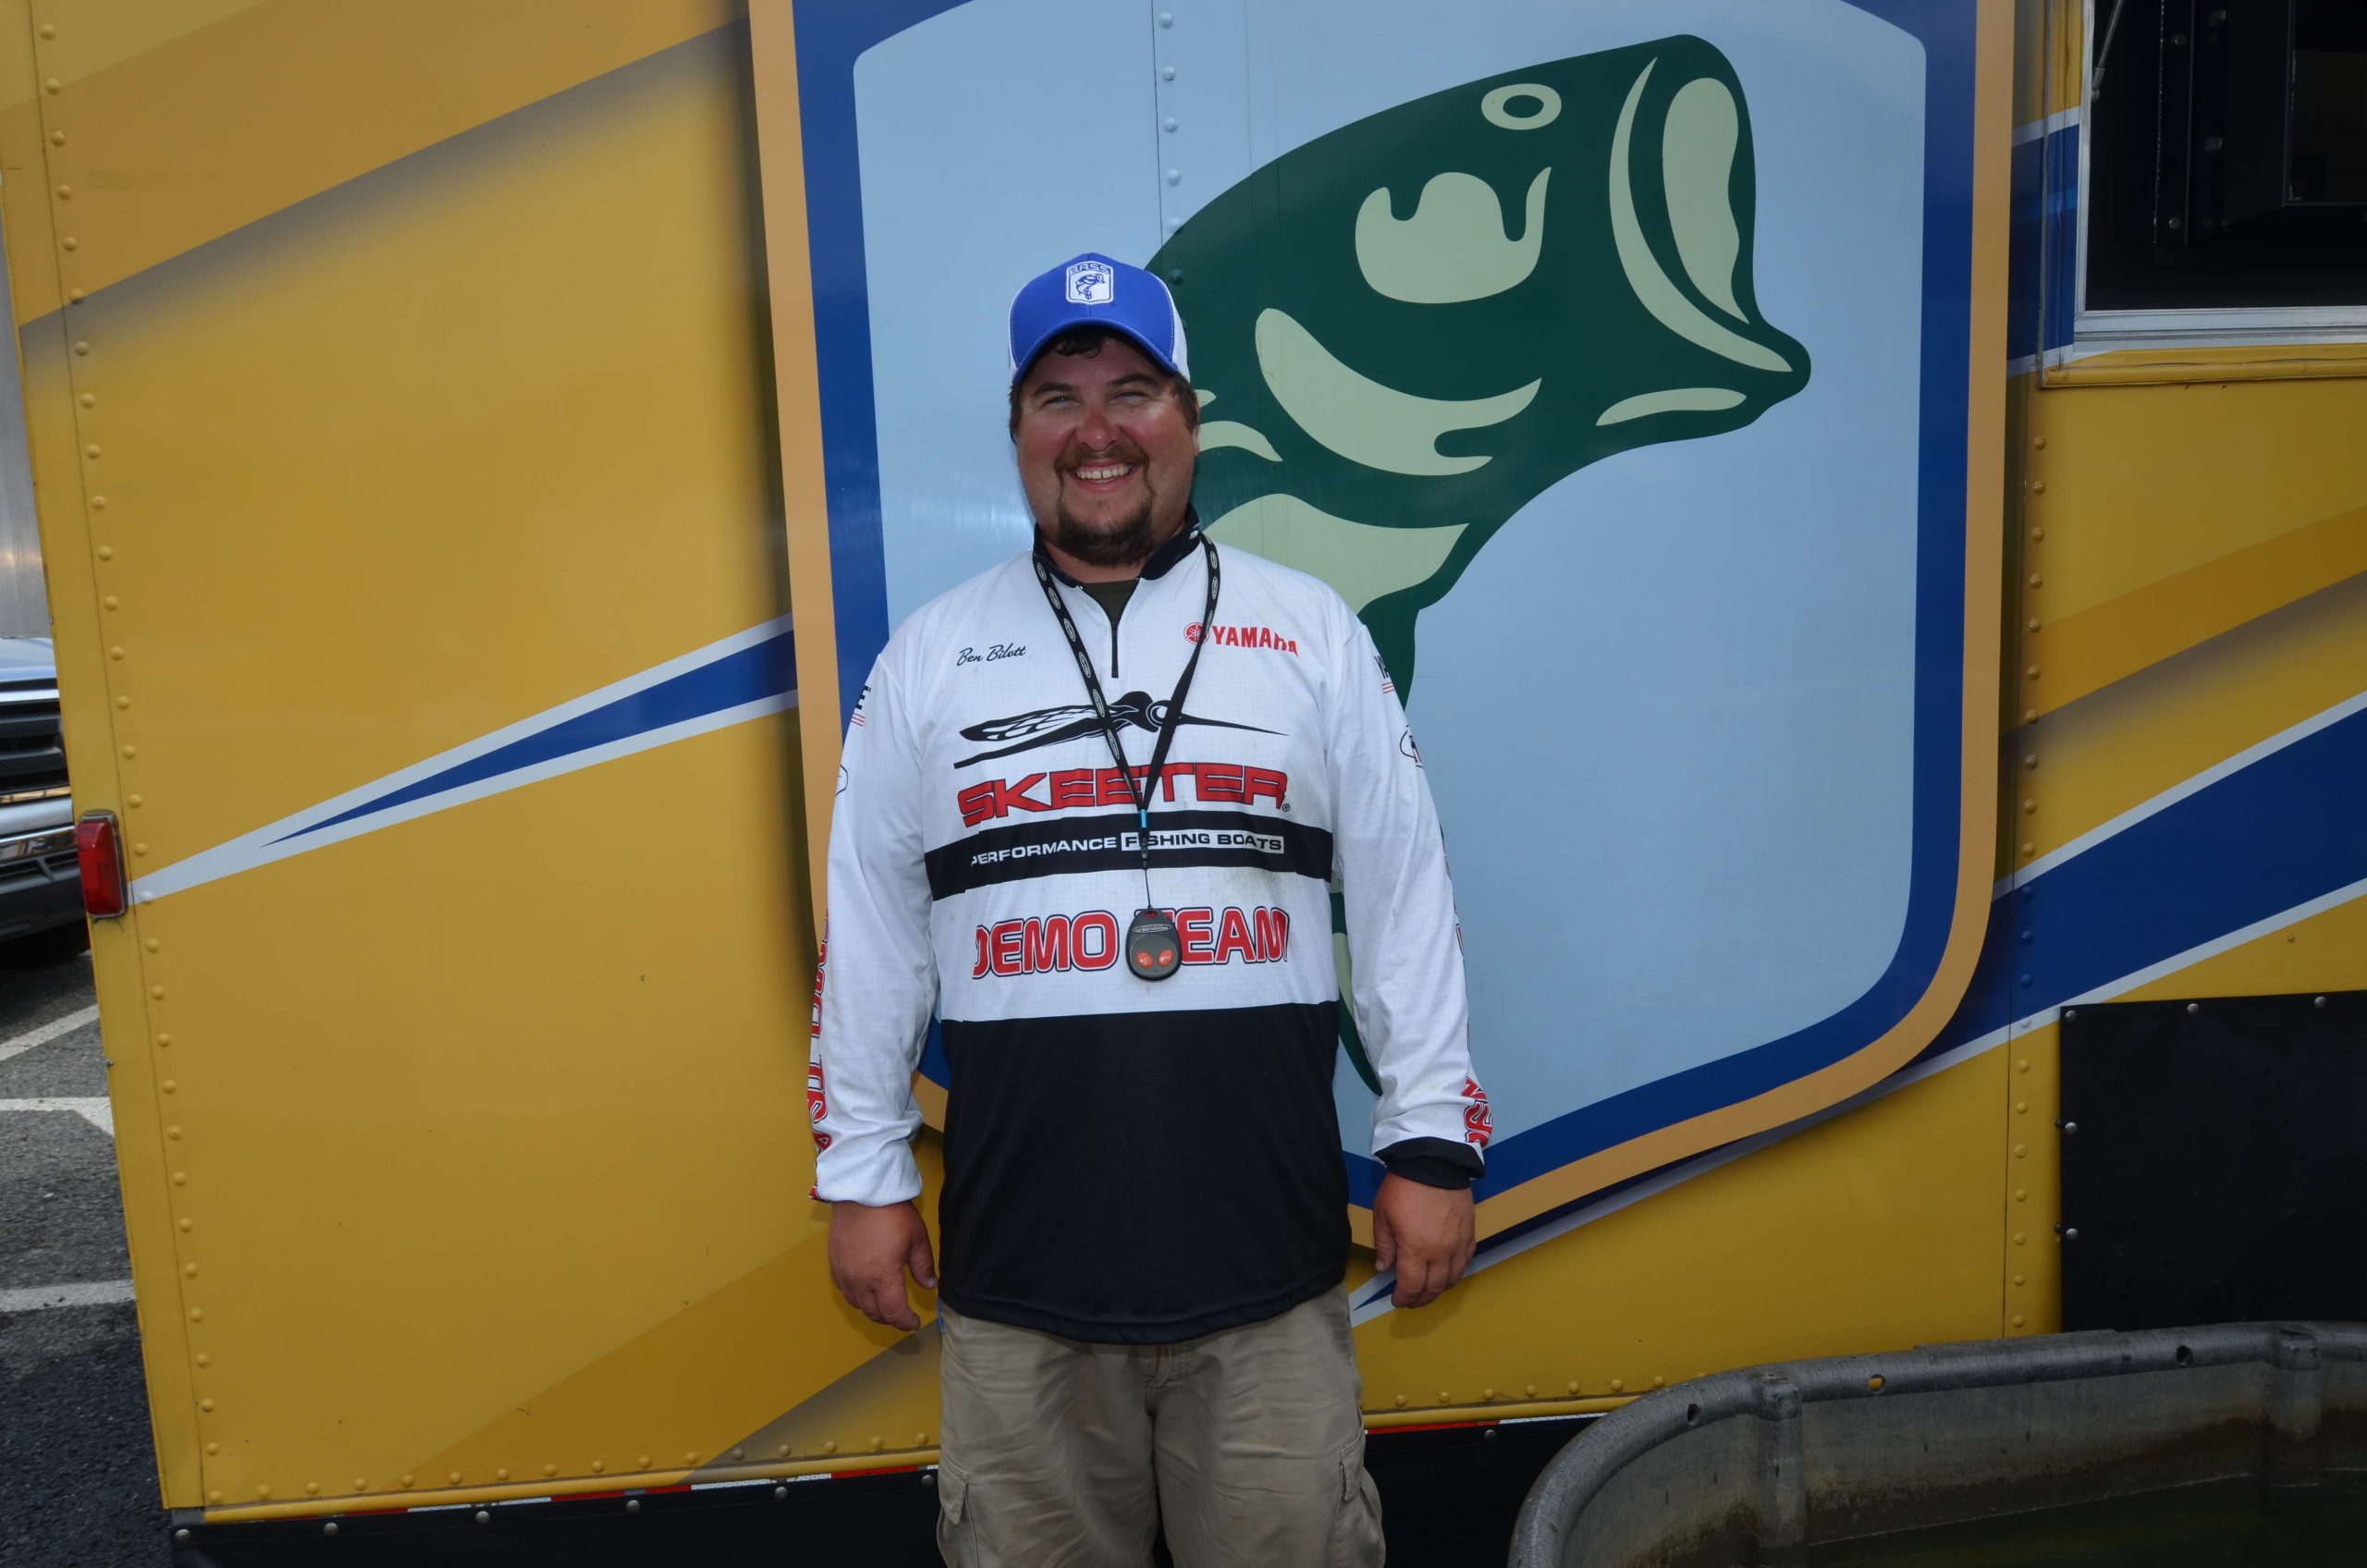 <h4>Ben Bilott</h4>
Pennsylvania Boater<br>
B.A.S.S. Nation Club: Bass Holes<BR>
Occupation:  Machinist/Welder<BR>
Hobbies: Old iron, farming, hunting/trapping<BR>
Sponsors: Skeeter, Yamaha, Towne Marine, LIVETARGET Lures
